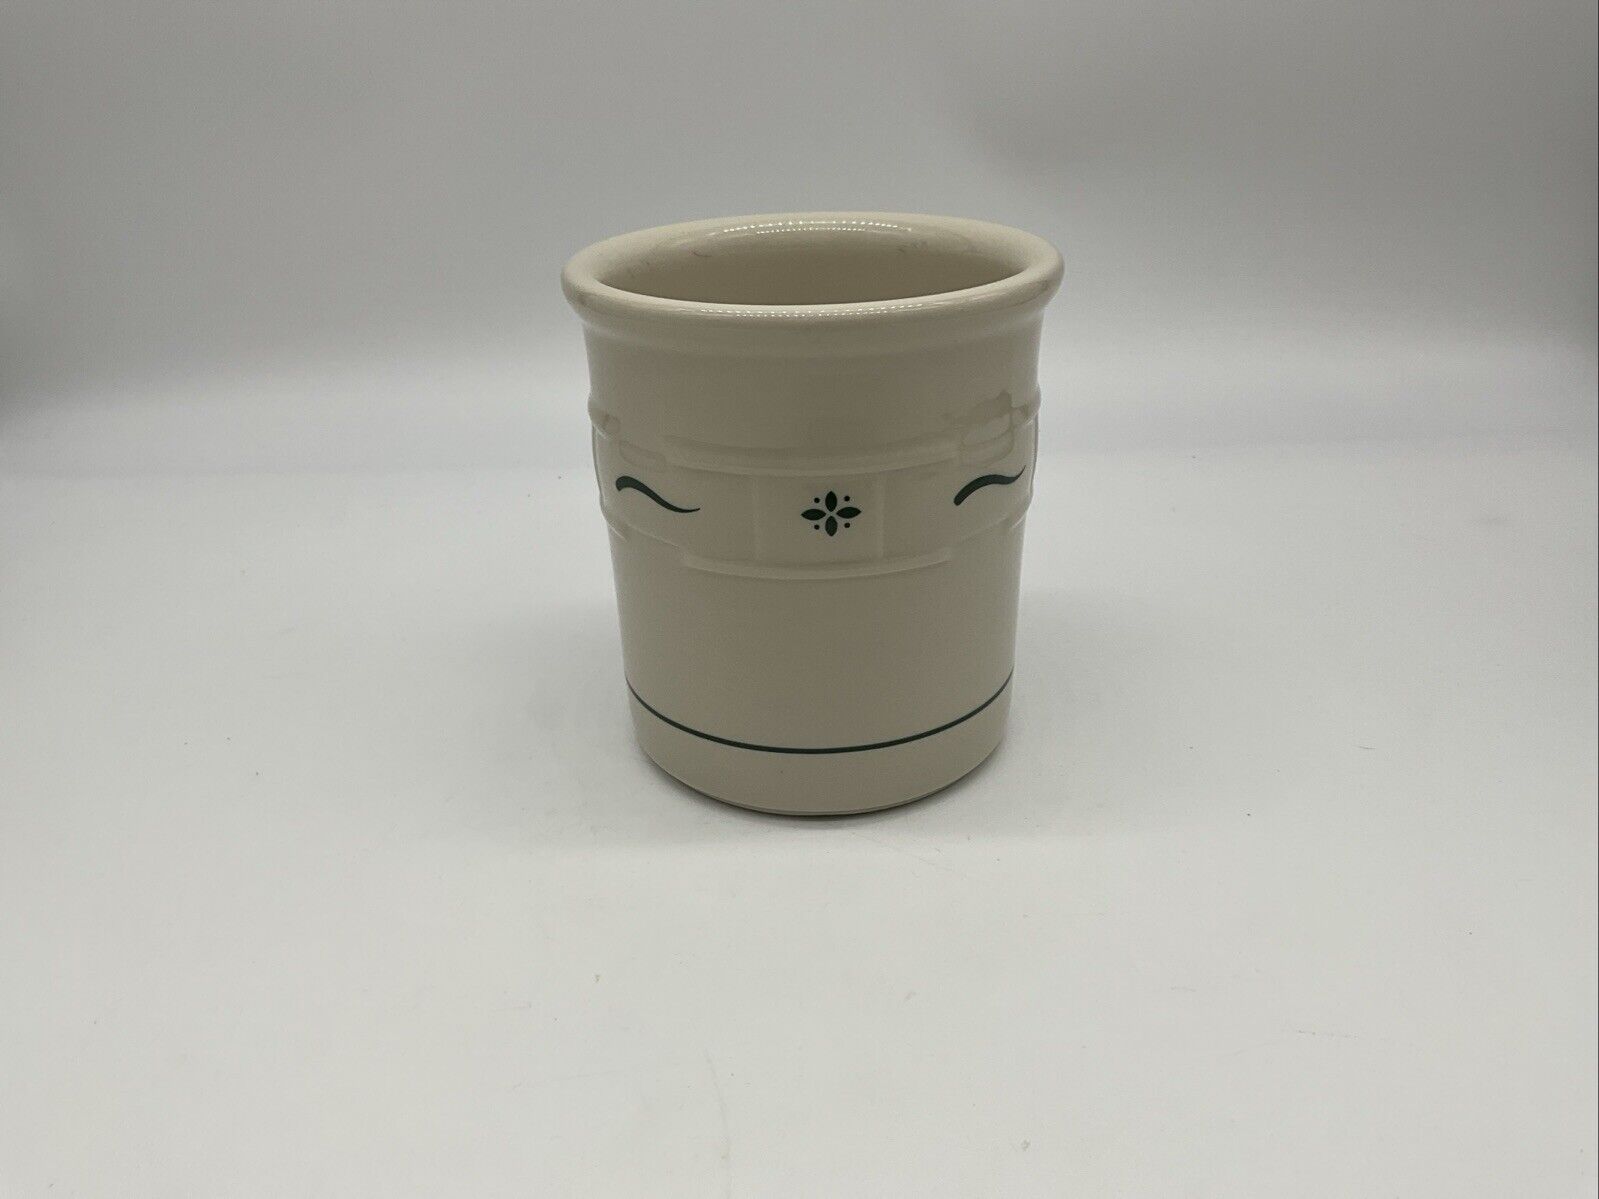 Longaberger Pottery Green Woven Traditions Utensil Crock 5 1/2” Tall 5” Wide